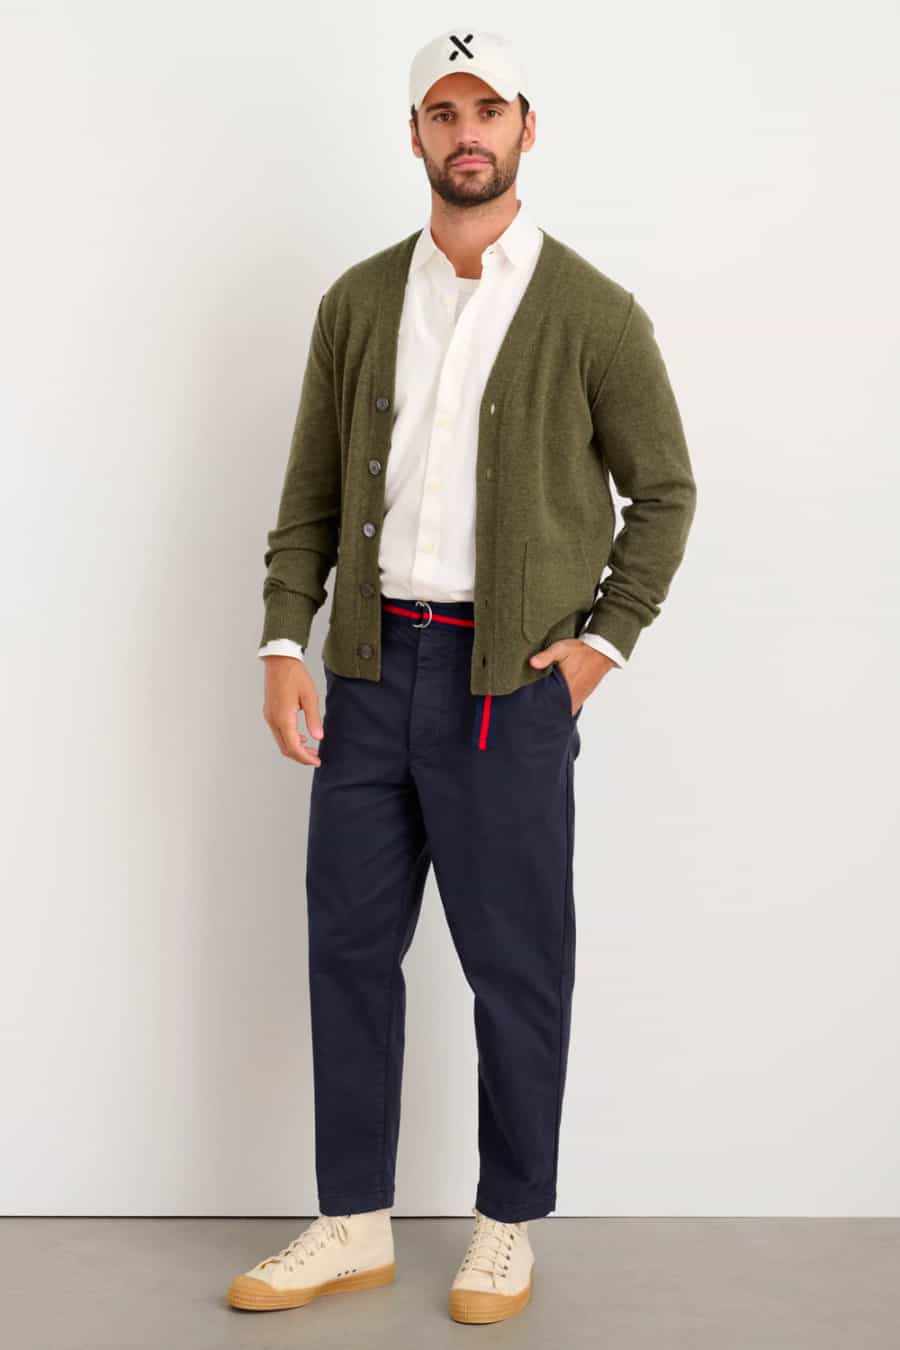 Men's navy chinos, white shirt, green cardigan and white high-top sneakers outfit